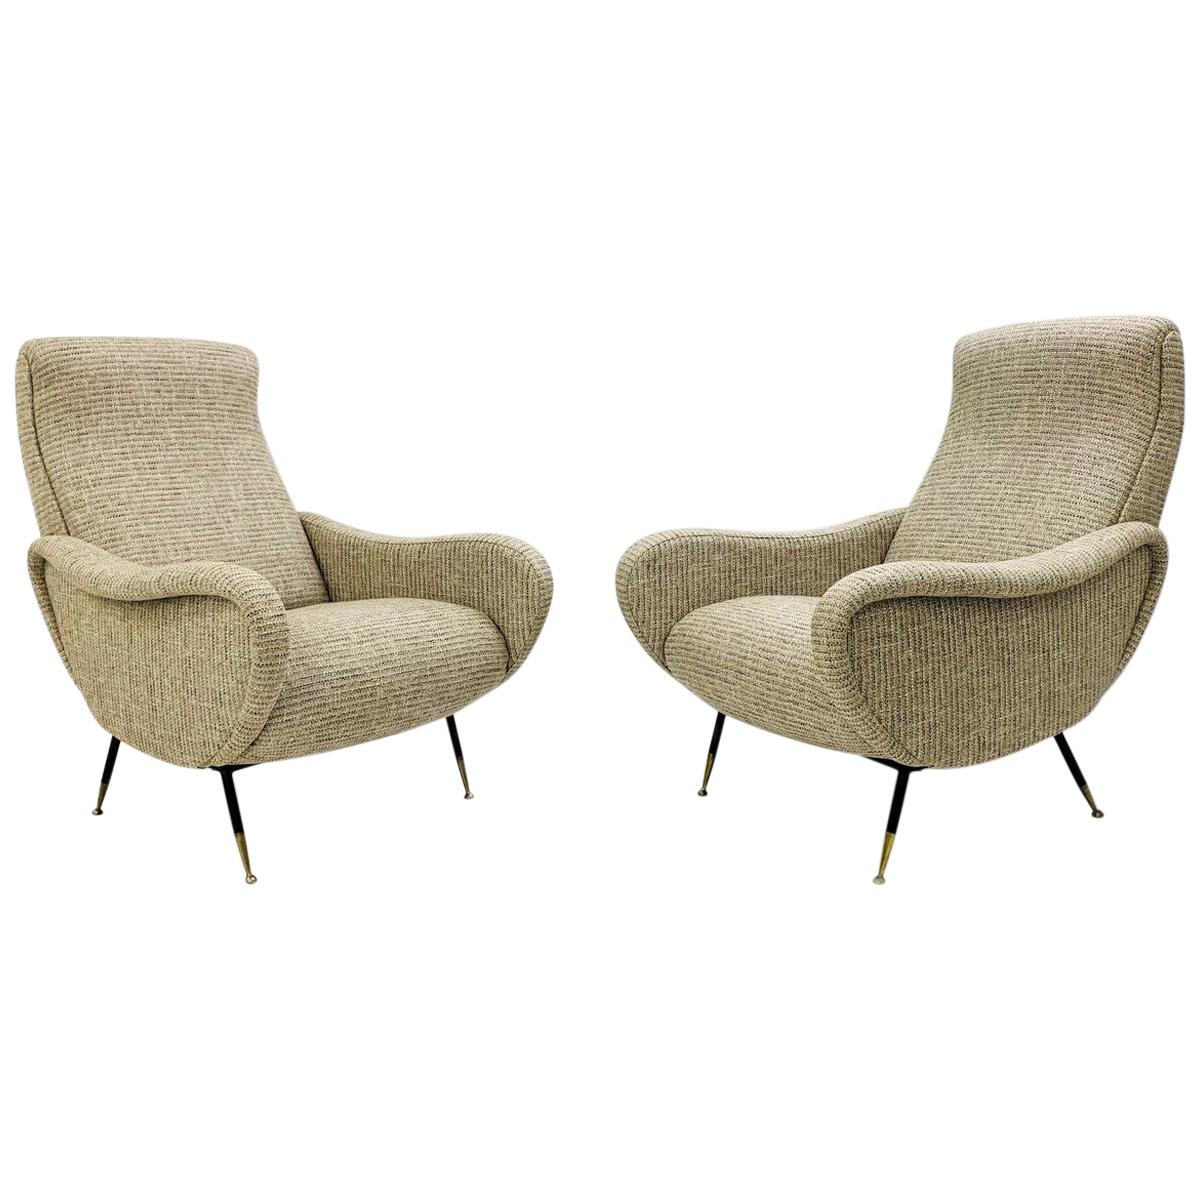 Pair of Mid-Century Modern Italian Armchairs in the Style of Marco Zanuso, 1950s